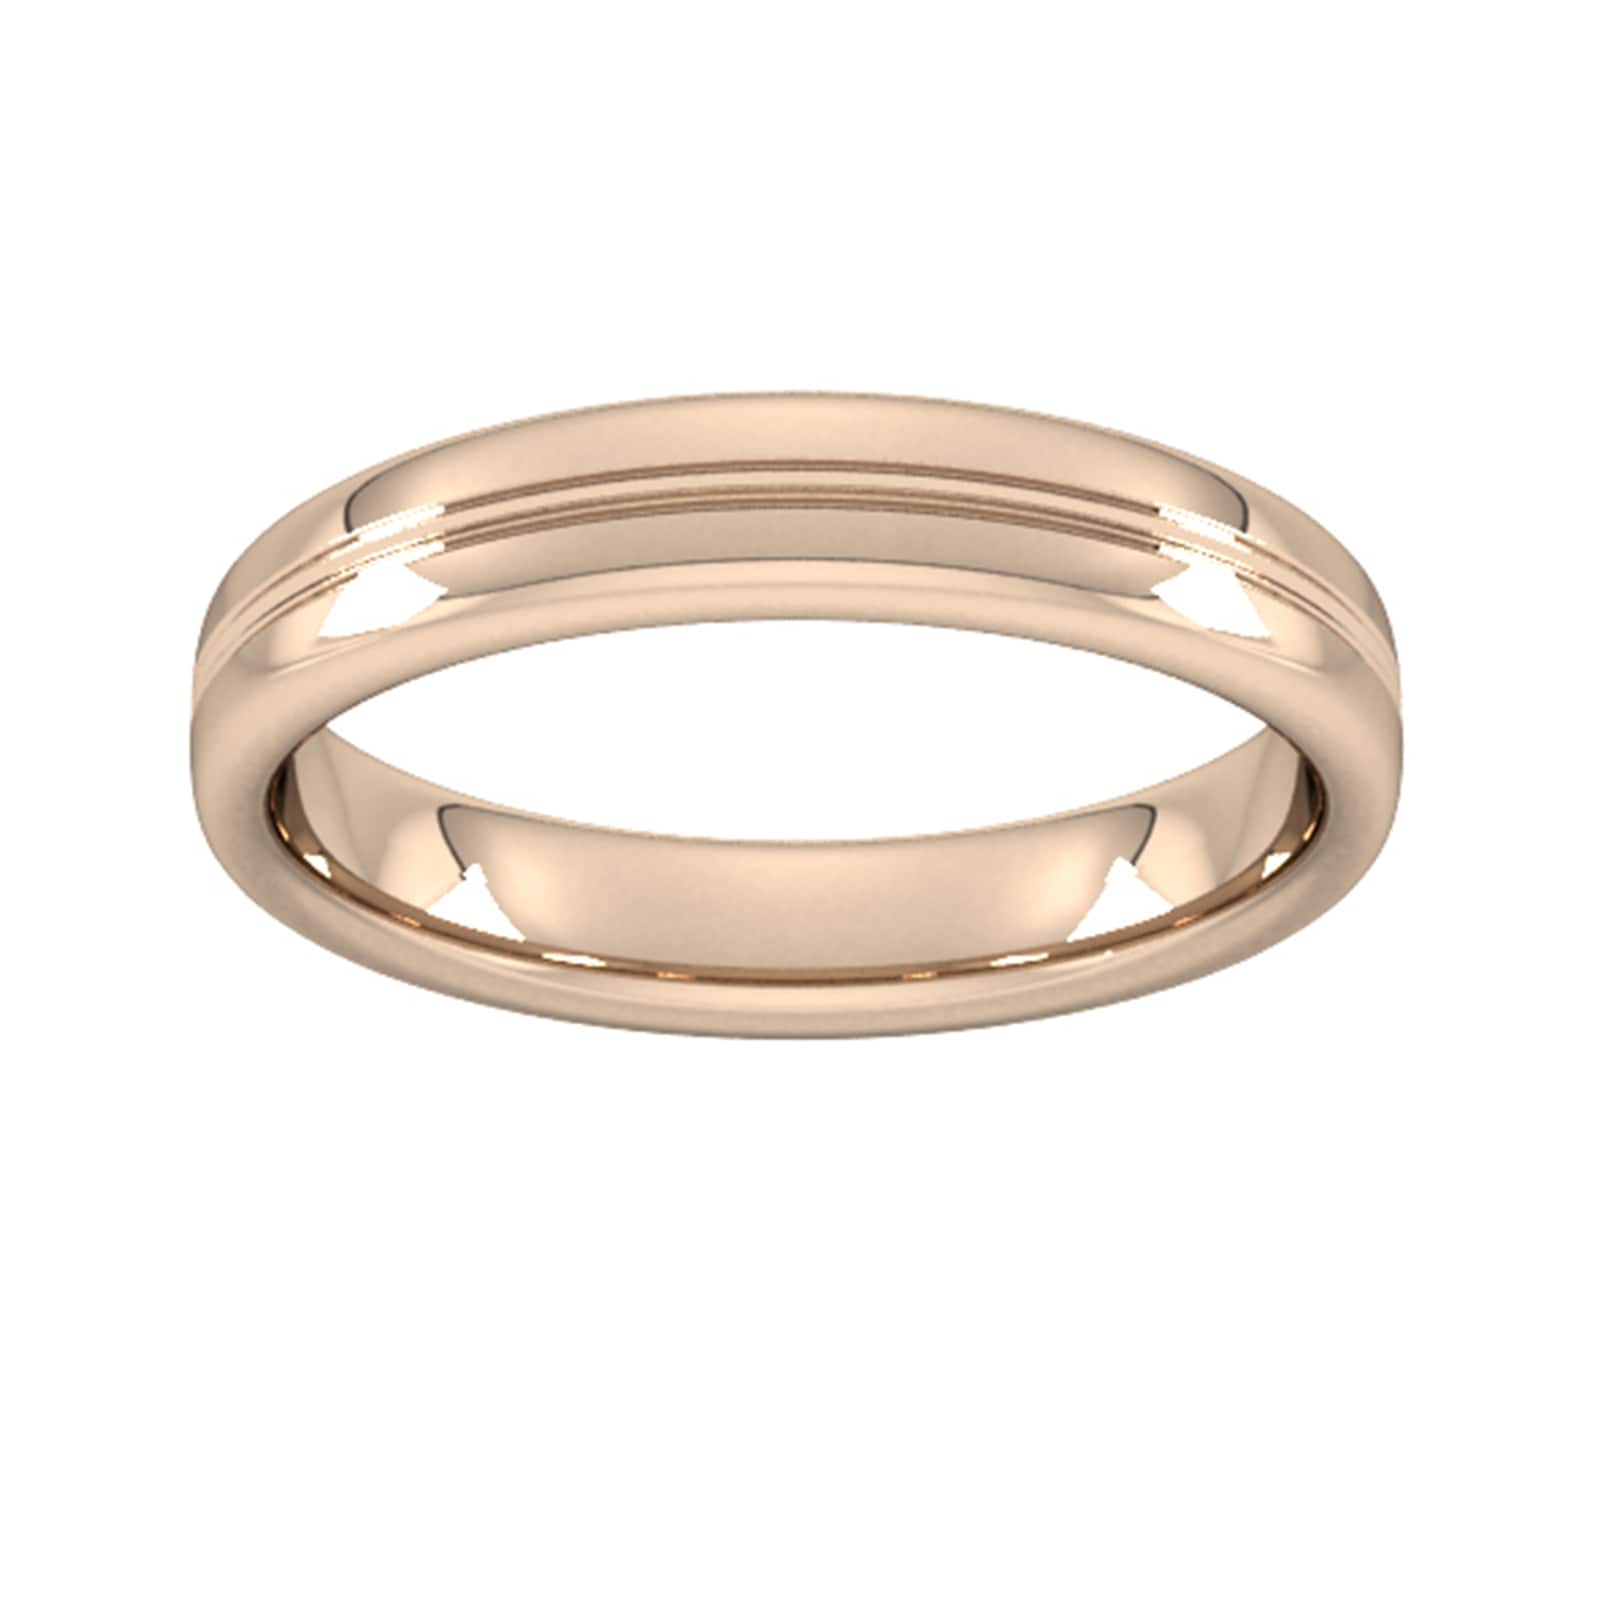 4mm Slight Court Extra Heavy Grooved Polished Finish Wedding Ring In 18 Carat Rose Gold - Ring Size M